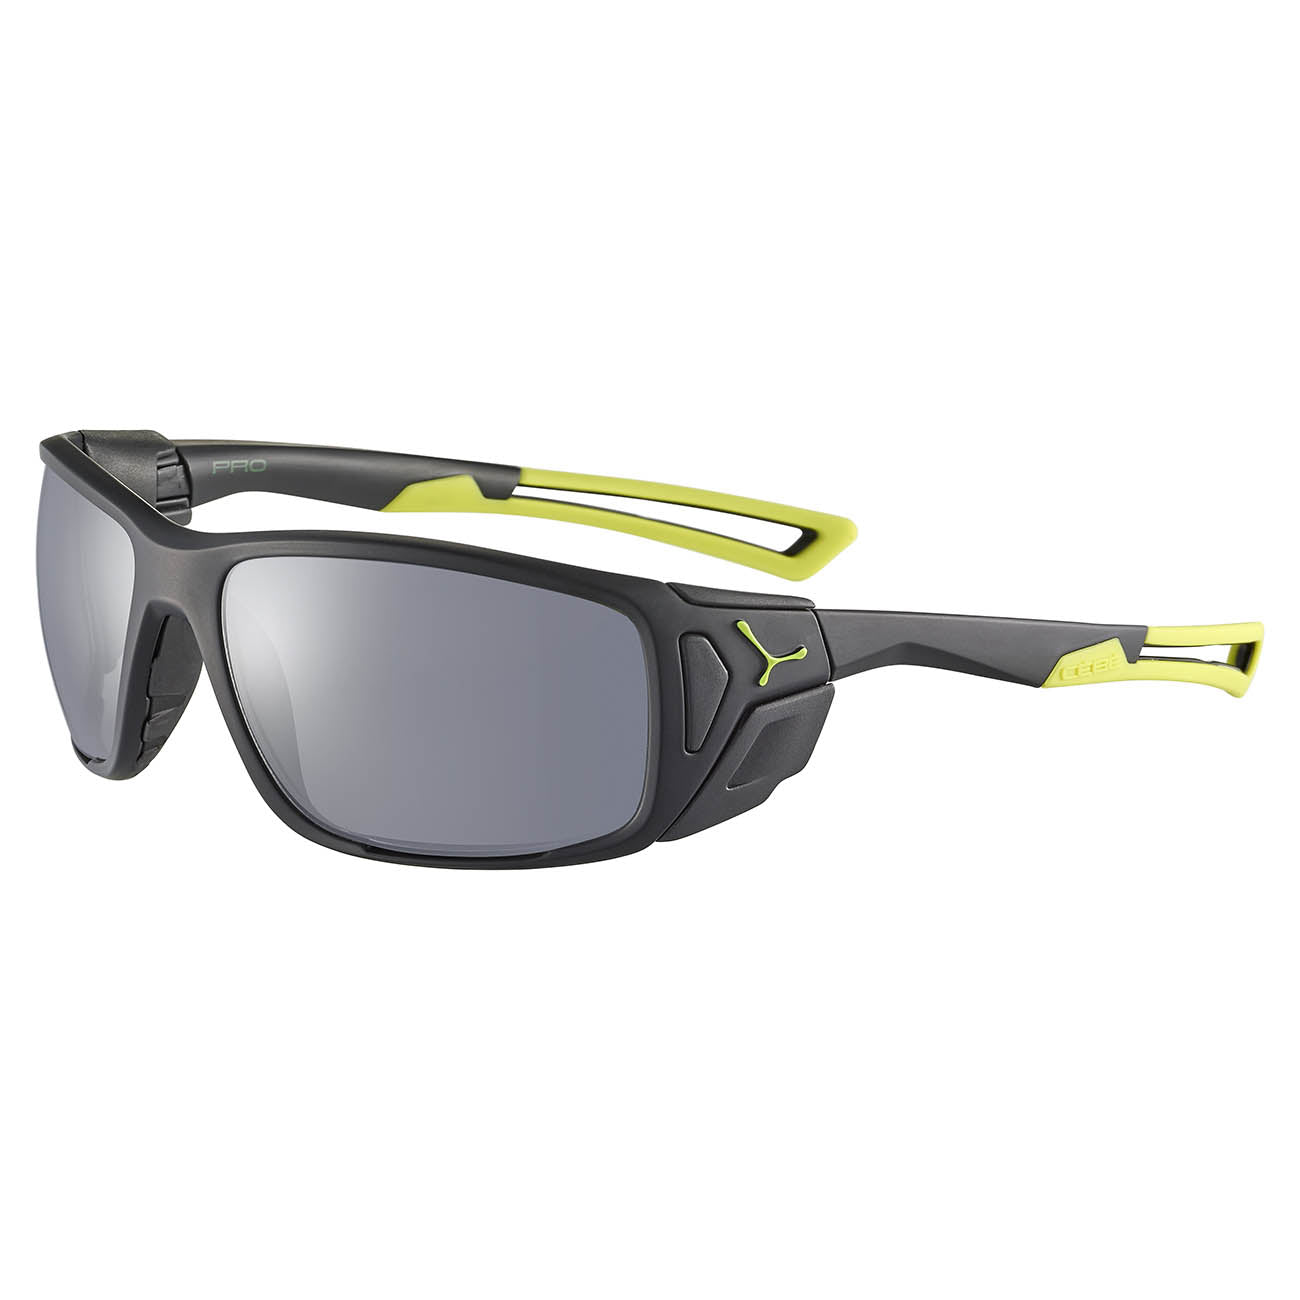 Cebe PROGUIDE Hiking and Mountaineering Sunglasses - CS06701